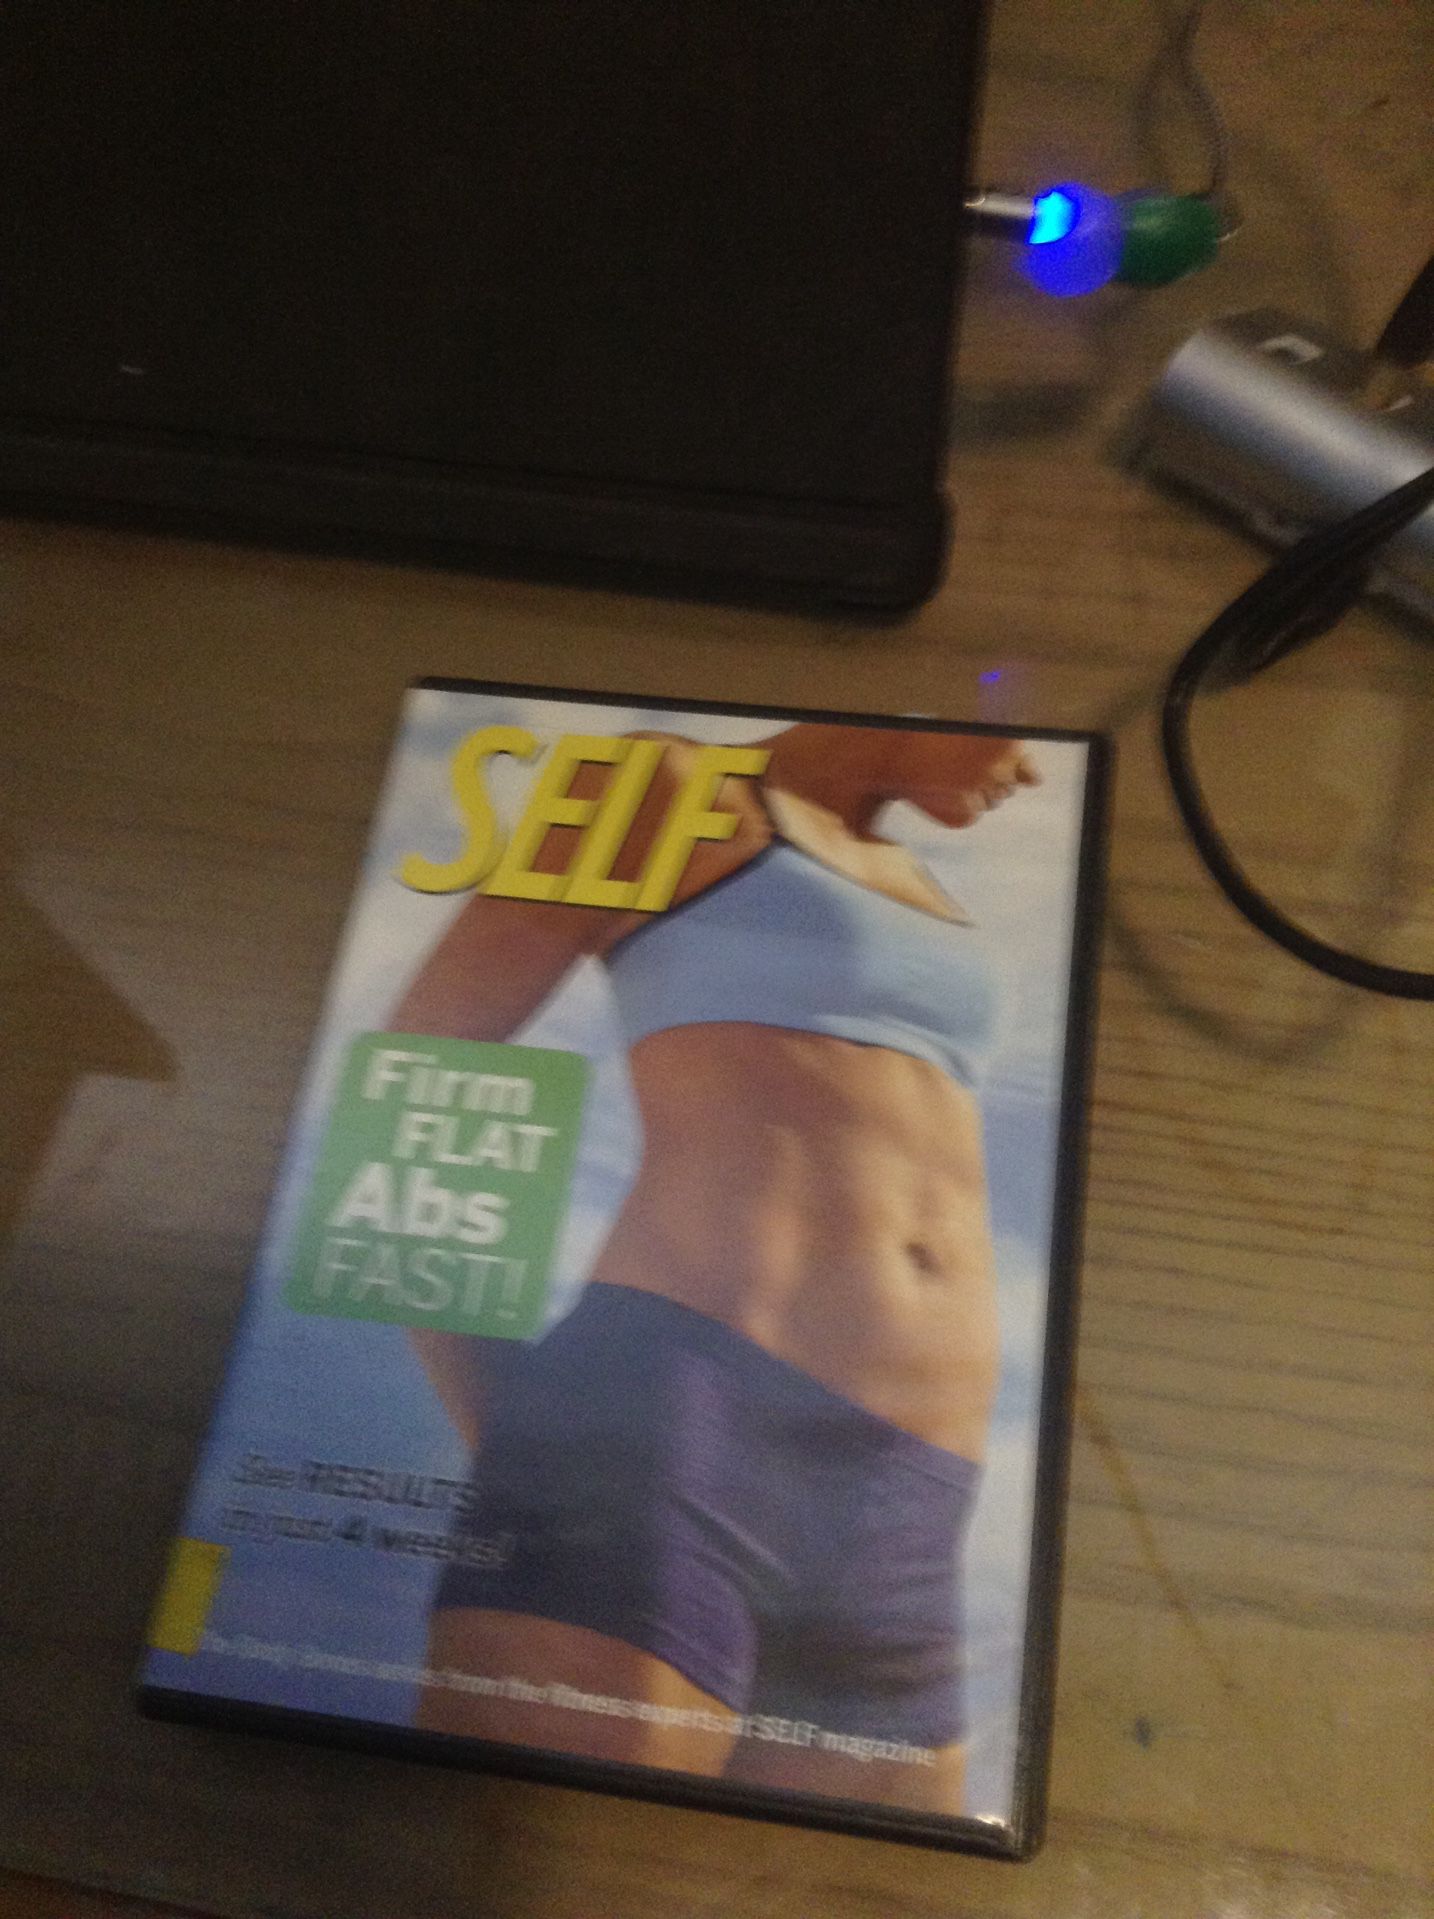 Self firm flat abs fast